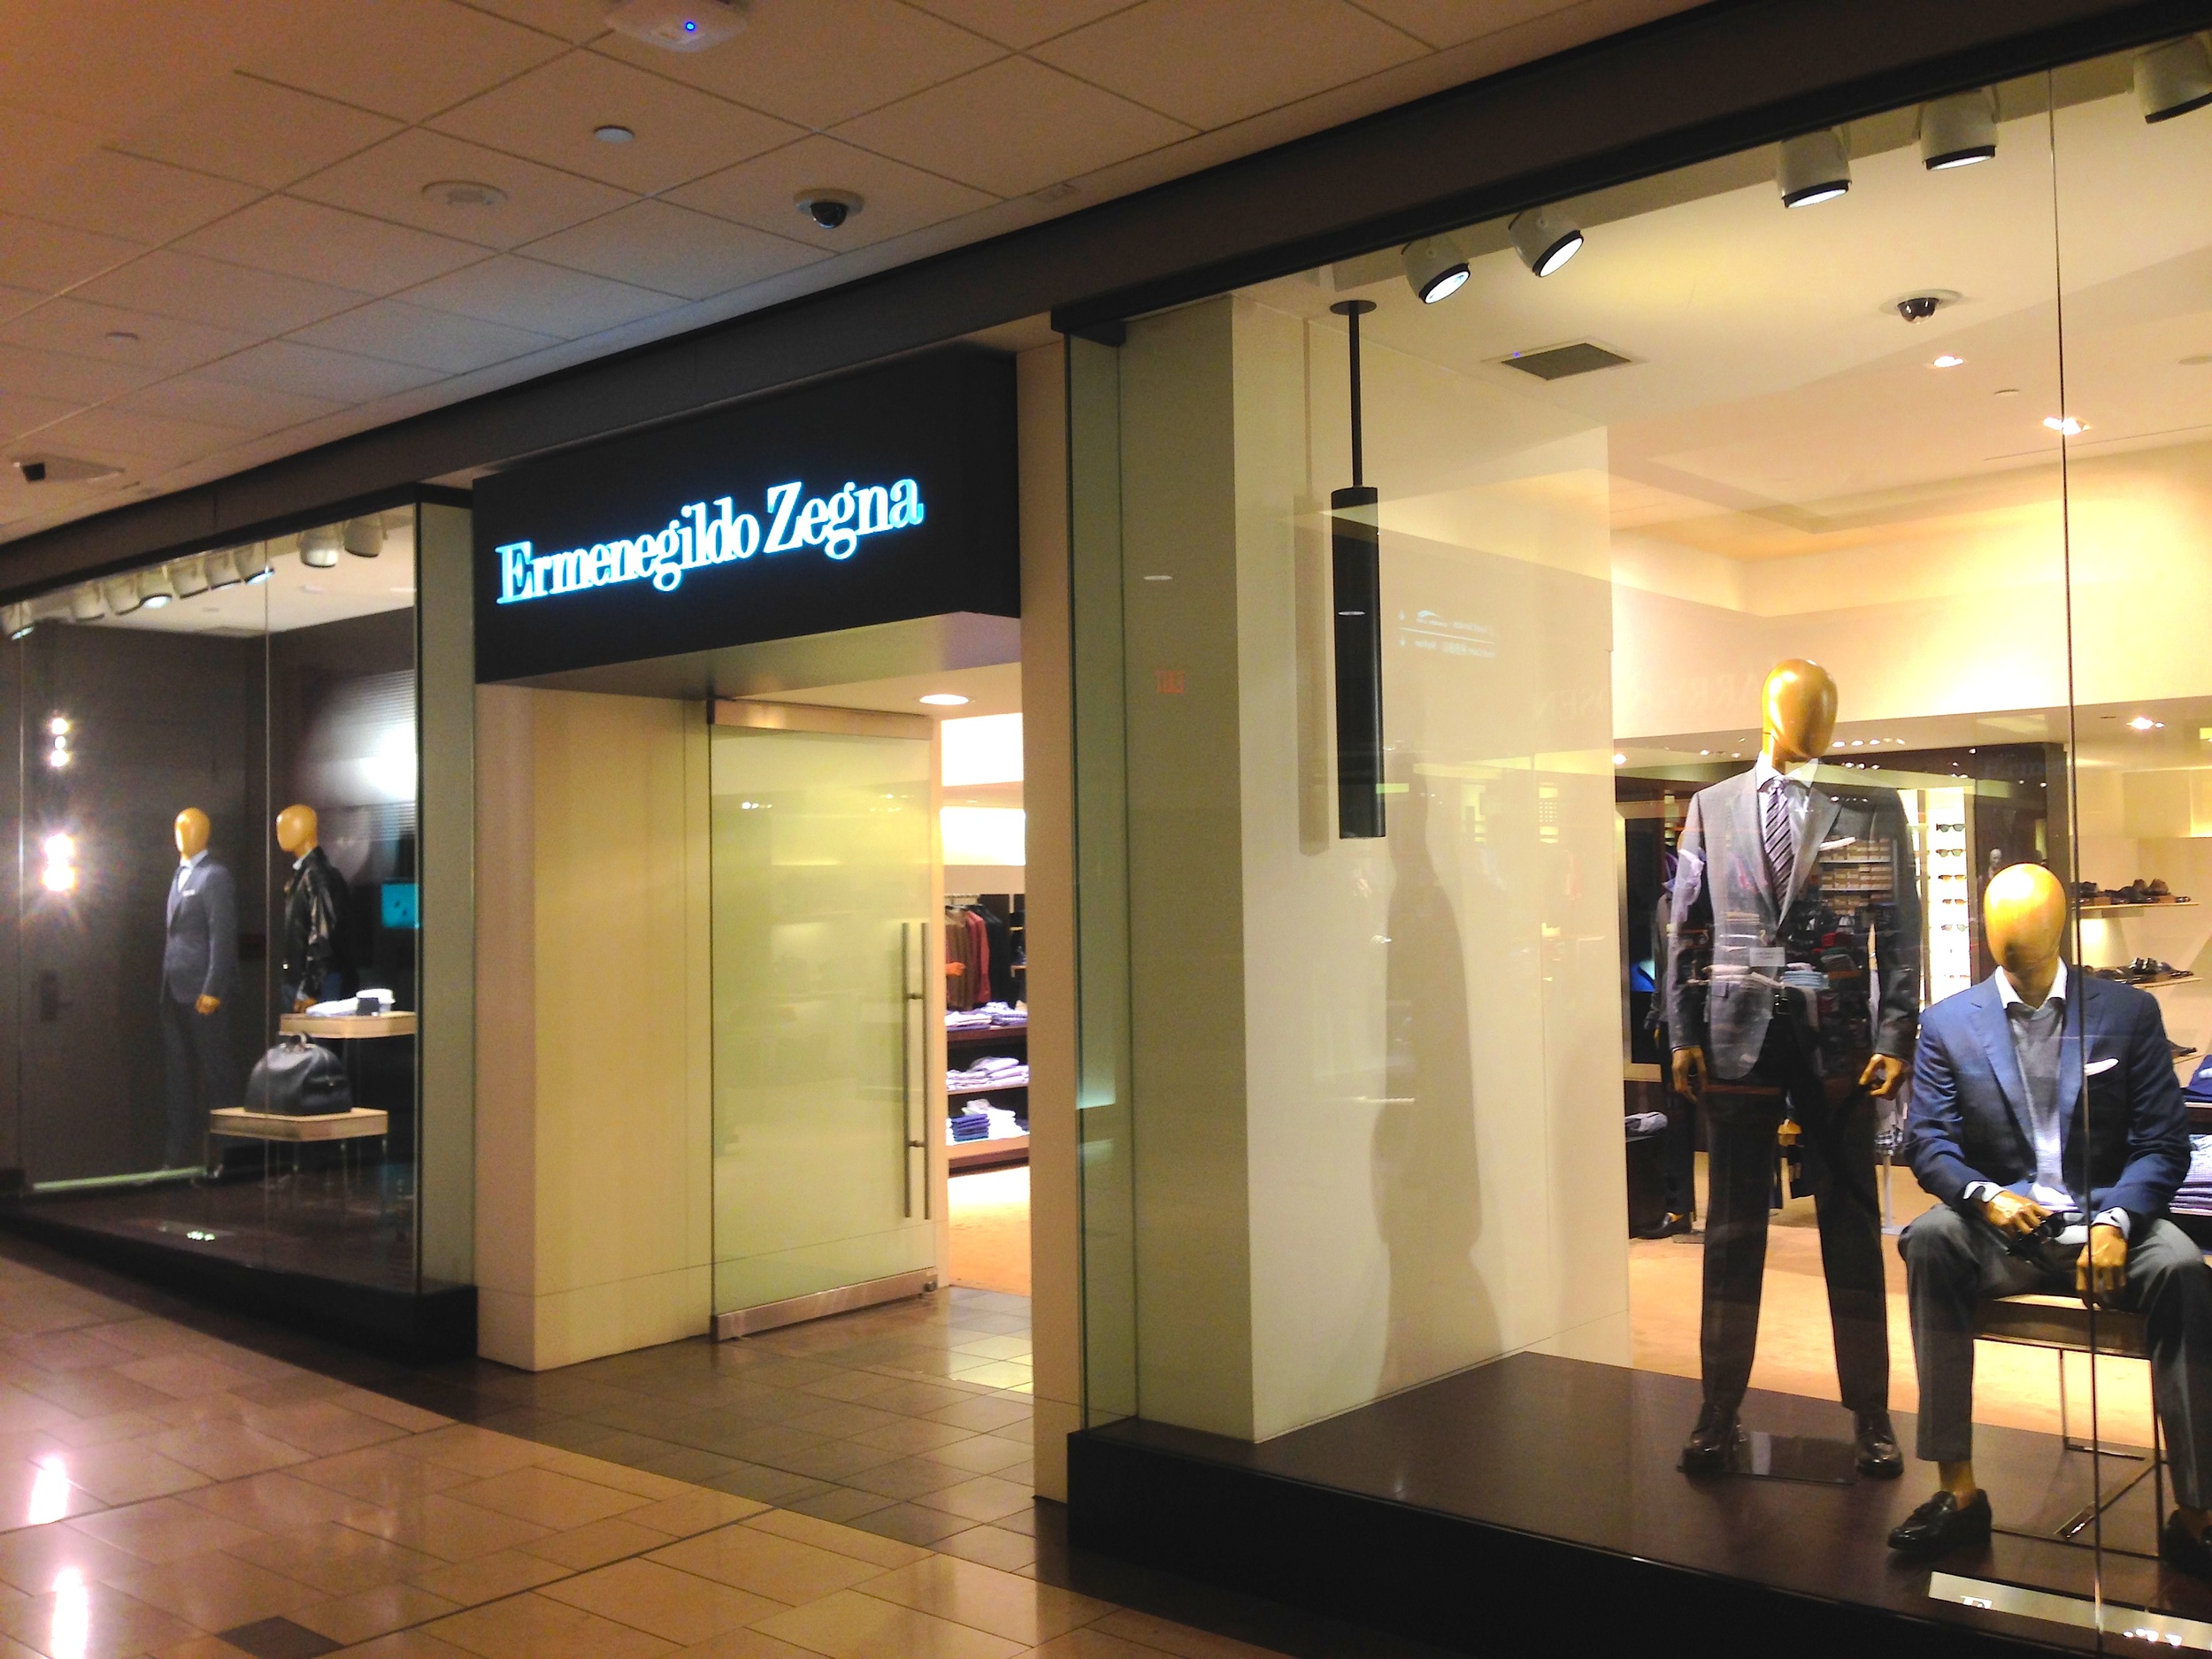 Zegna boutique, located across the hall from Harry Rosen (for reference, see lease plan below)